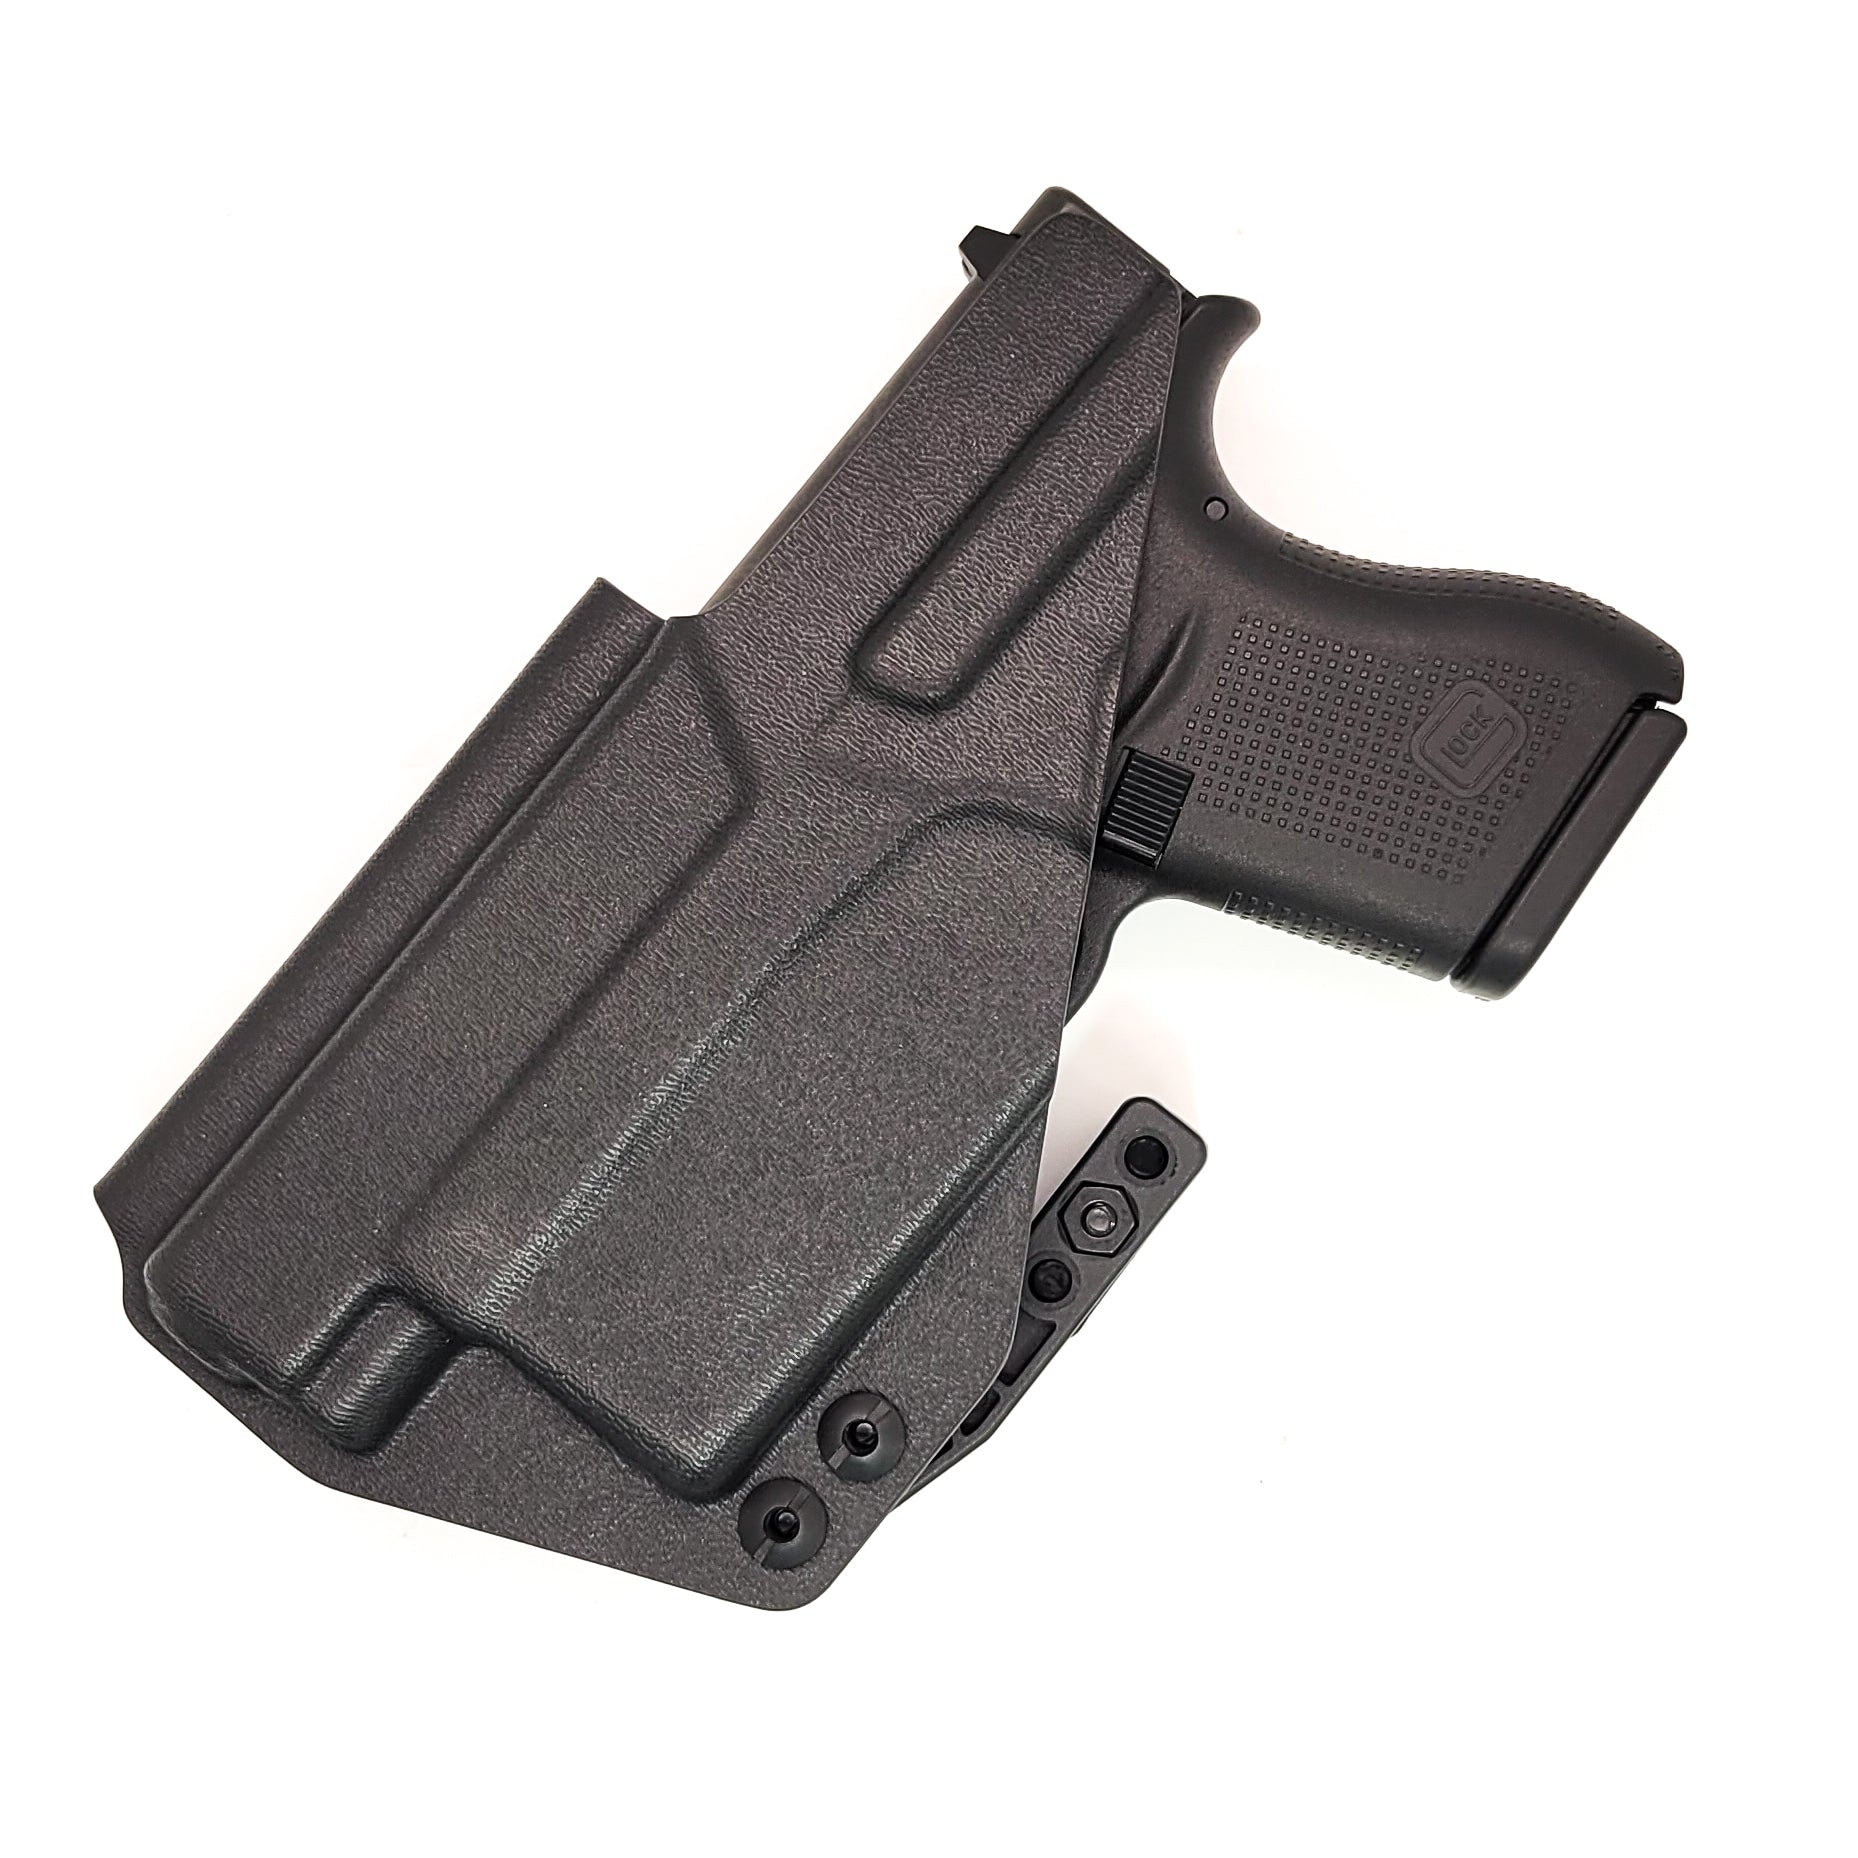 For the best, Inside Waistband IWB AIWB Kydex Holster designed to fit the Glock 43, 43X, or 48 with the Nightstick TSM-11W Weapon Mounted light, shop Four Brothers Holsters. Full sweat guard, adjustable retention, minimal material & smooth edges to reduce printing. Made in the USA. Cleared for red dot sights. 4Bros